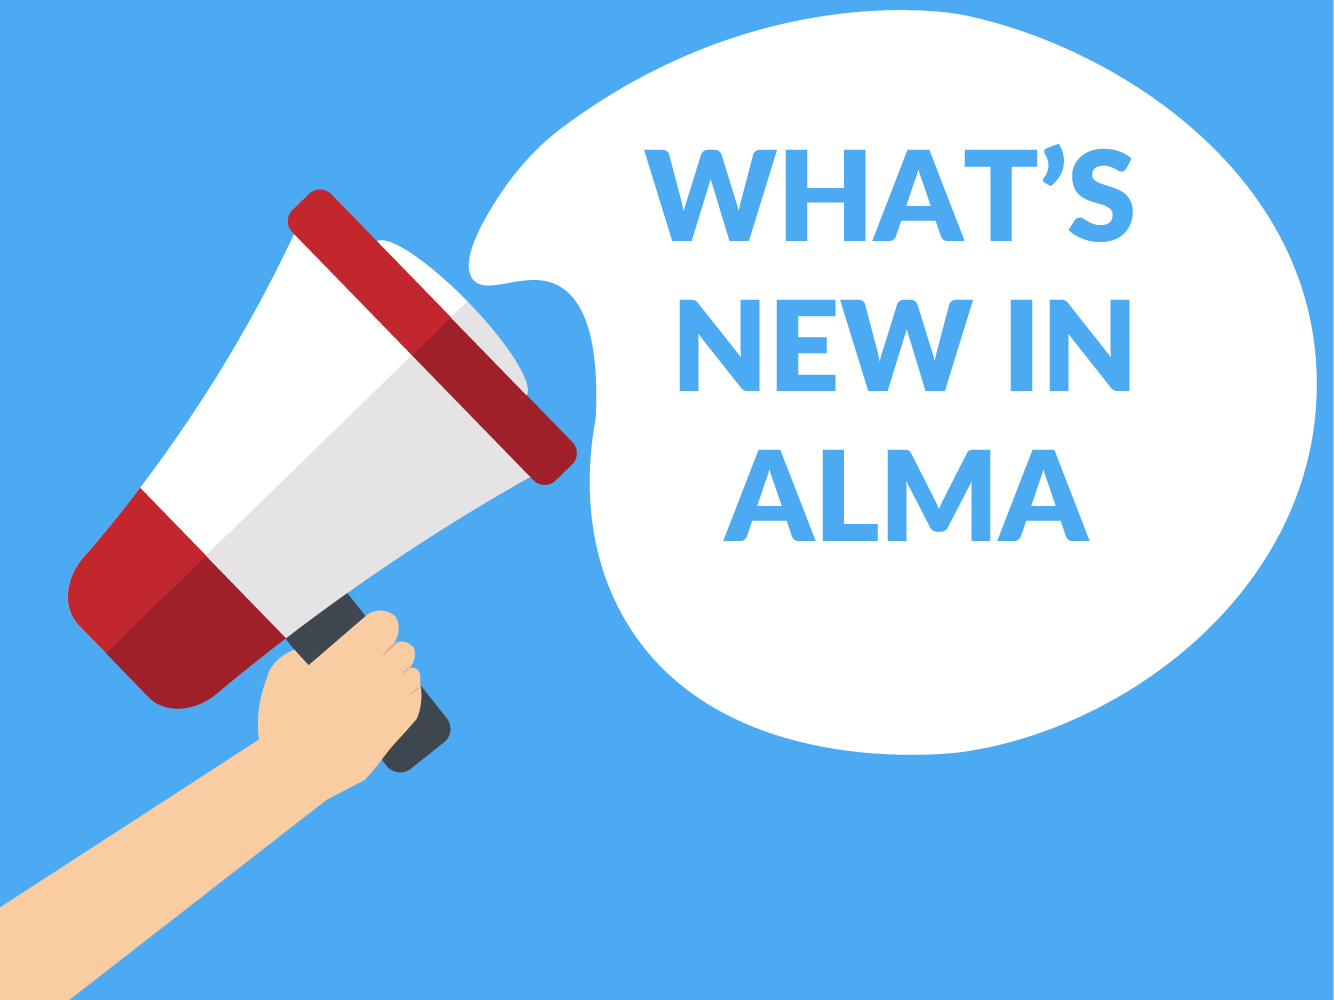 What’s new in Alma (mars 2019)